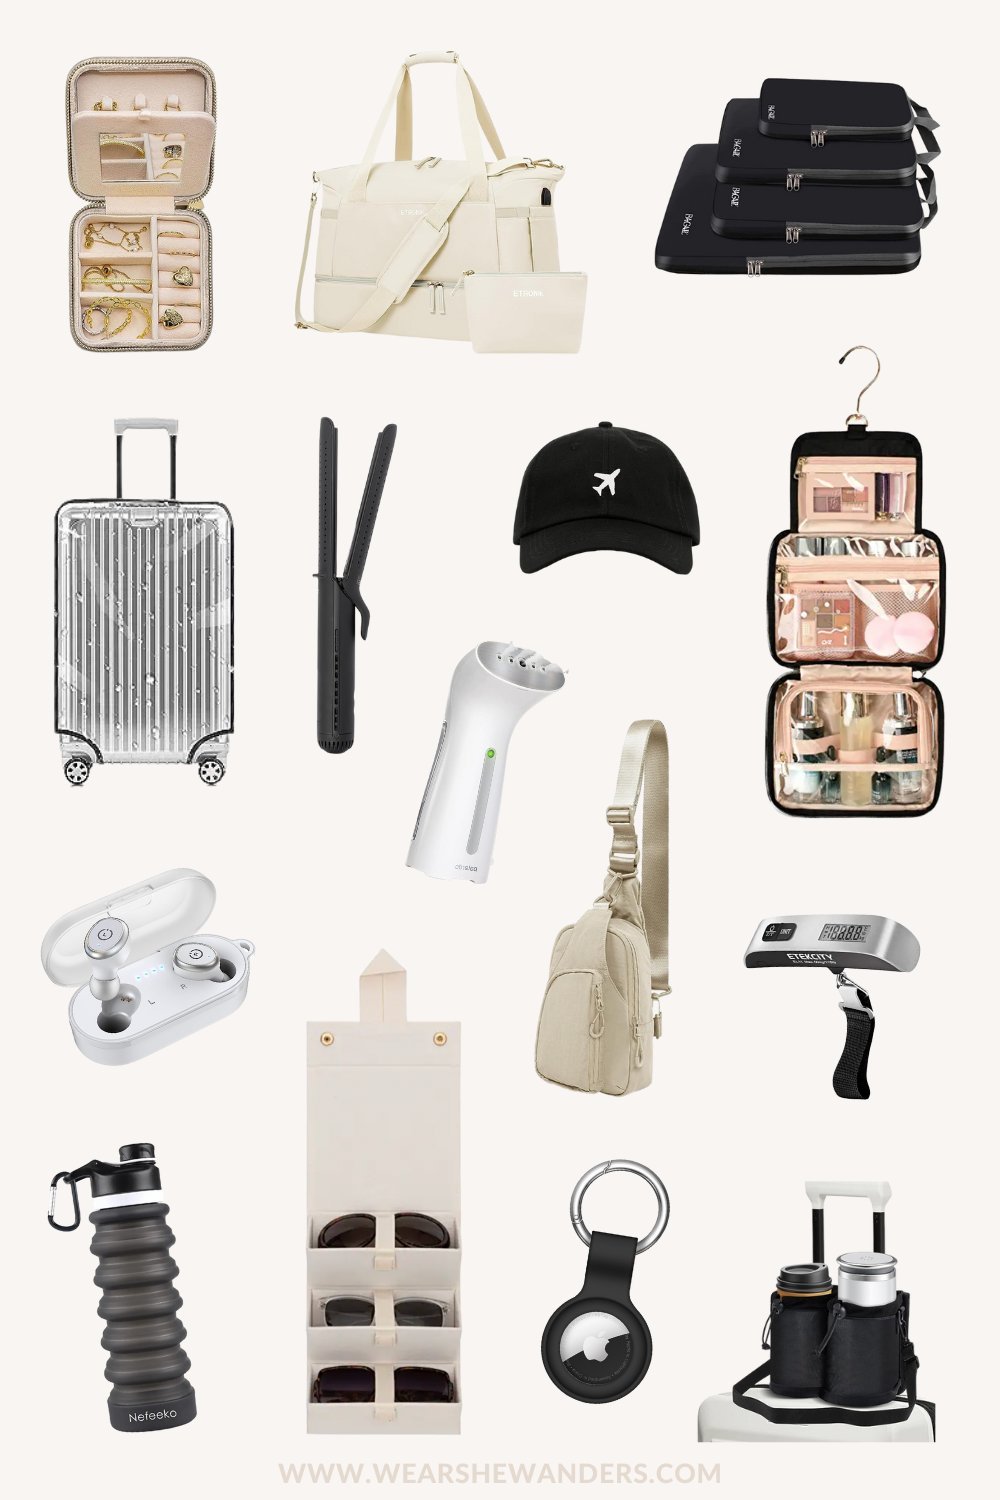 Unique Gift Ideas for Business Travelers: From Tech Gadgets to Travel  Accessories